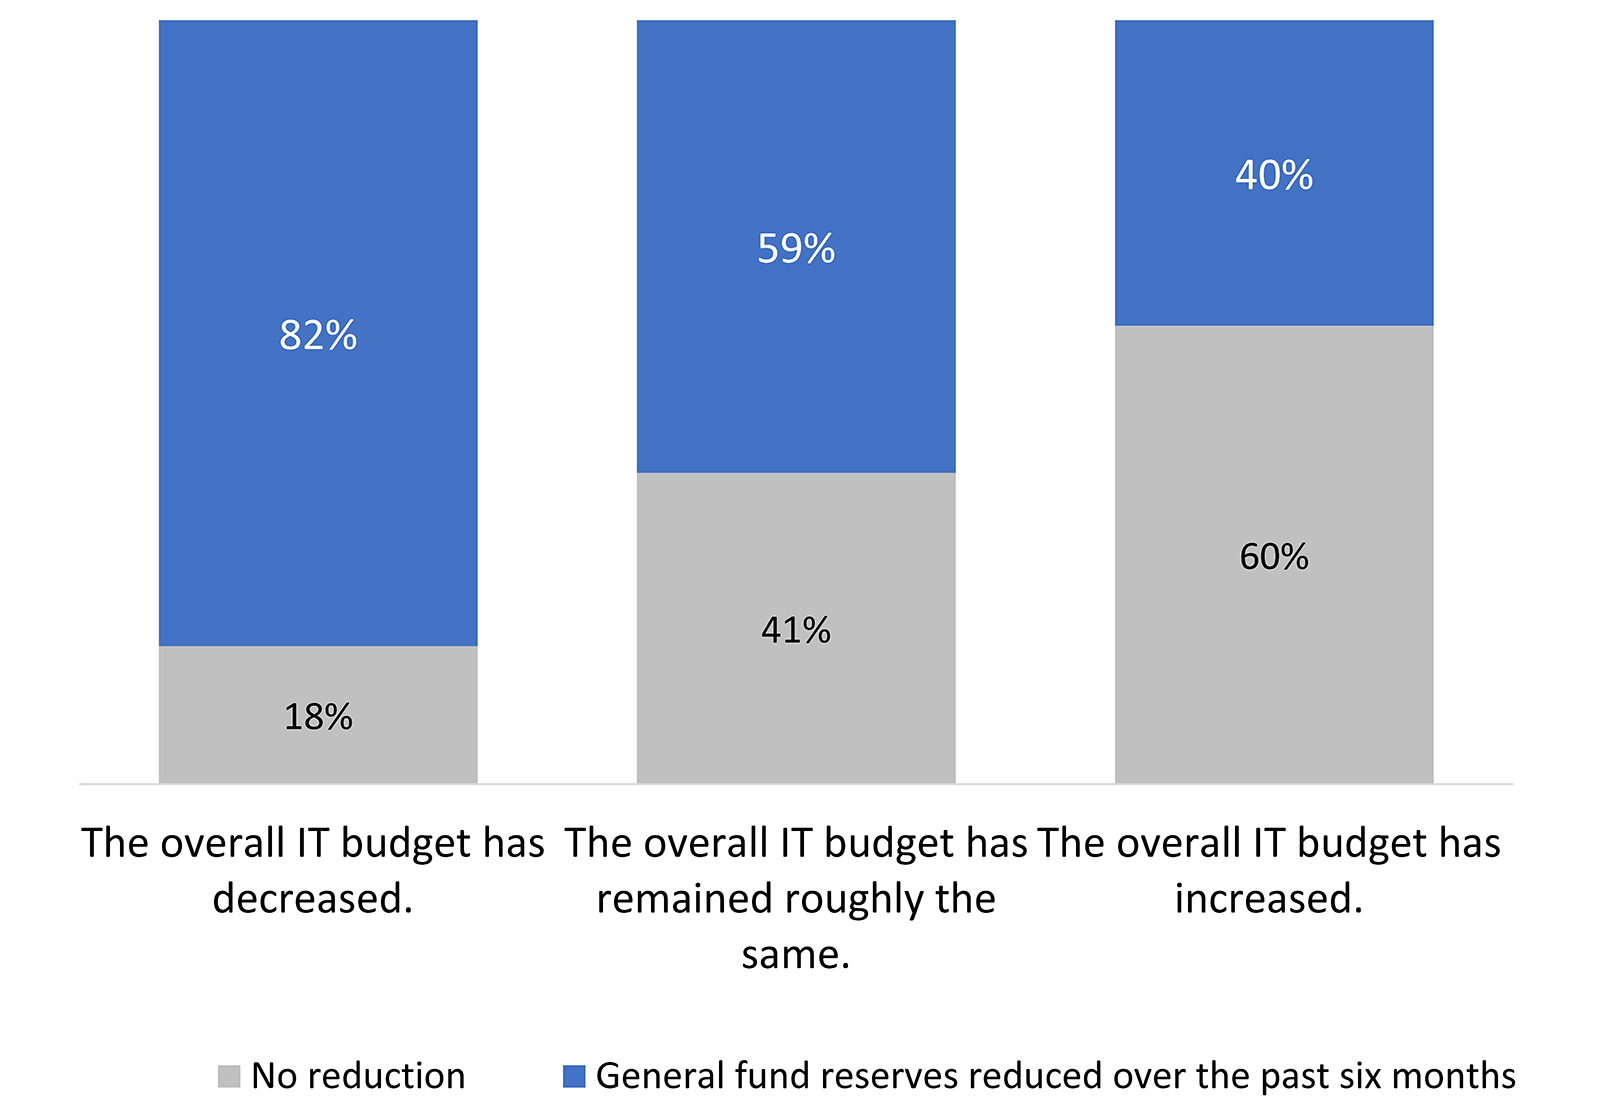 stacked bar chart showing percentage of respondents who said the General fund reserves were (R)educed over the past six months vs (N)o reduction.
The overall IT budget has decreased R 82%, N 18%.
The overall IT budget has remained roughly the same R 59%, N 41%.
The overall IT budget has incrased R 40%, N 60%.